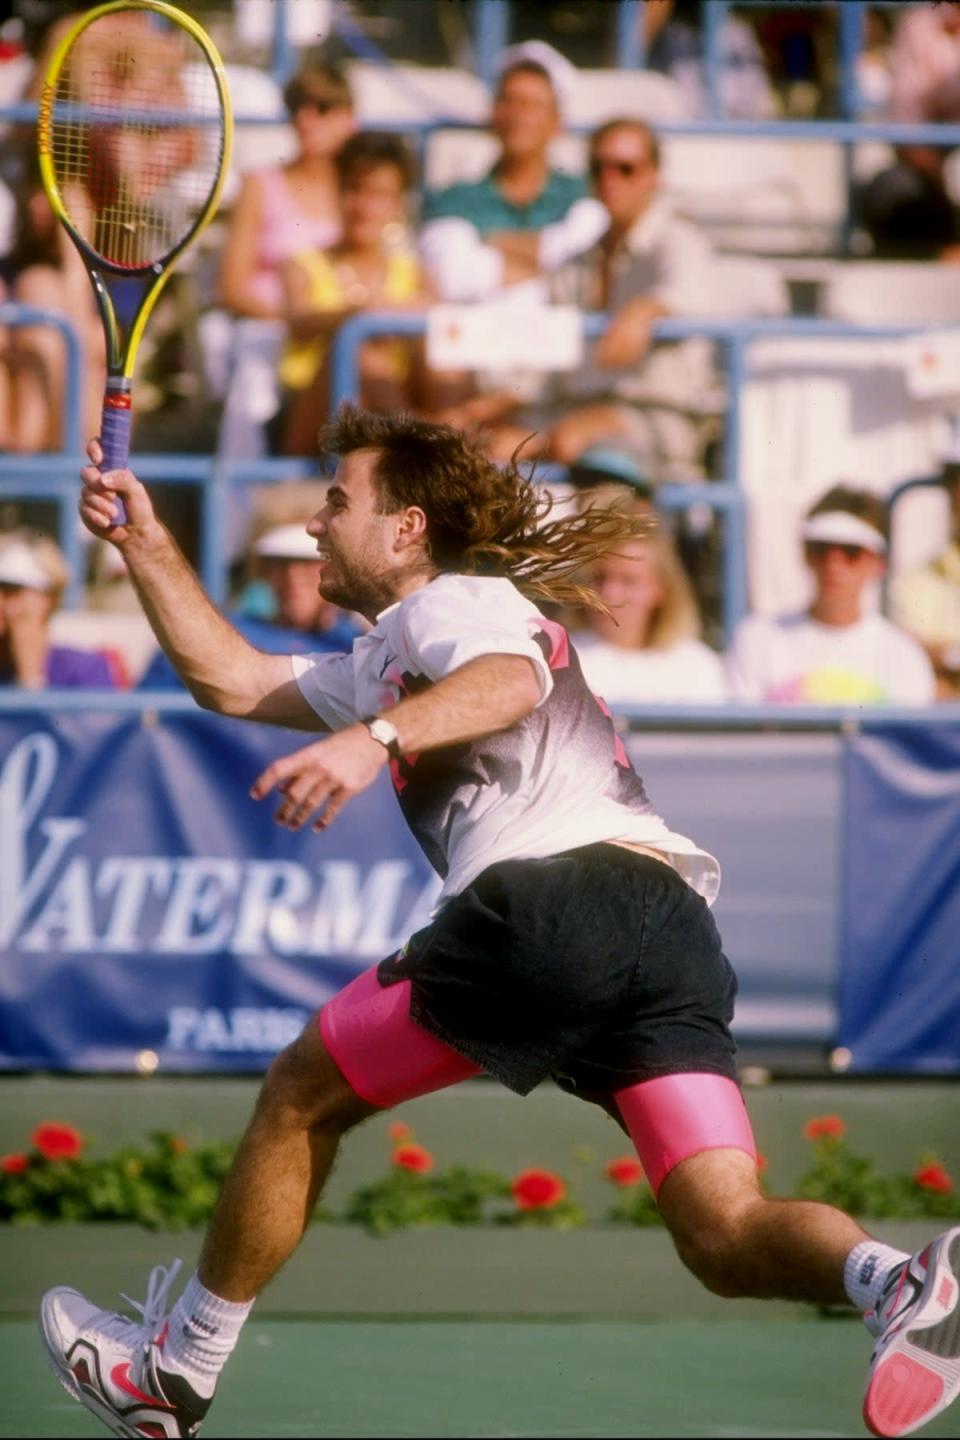 Andre Agassi in 1990 (Getty Images)